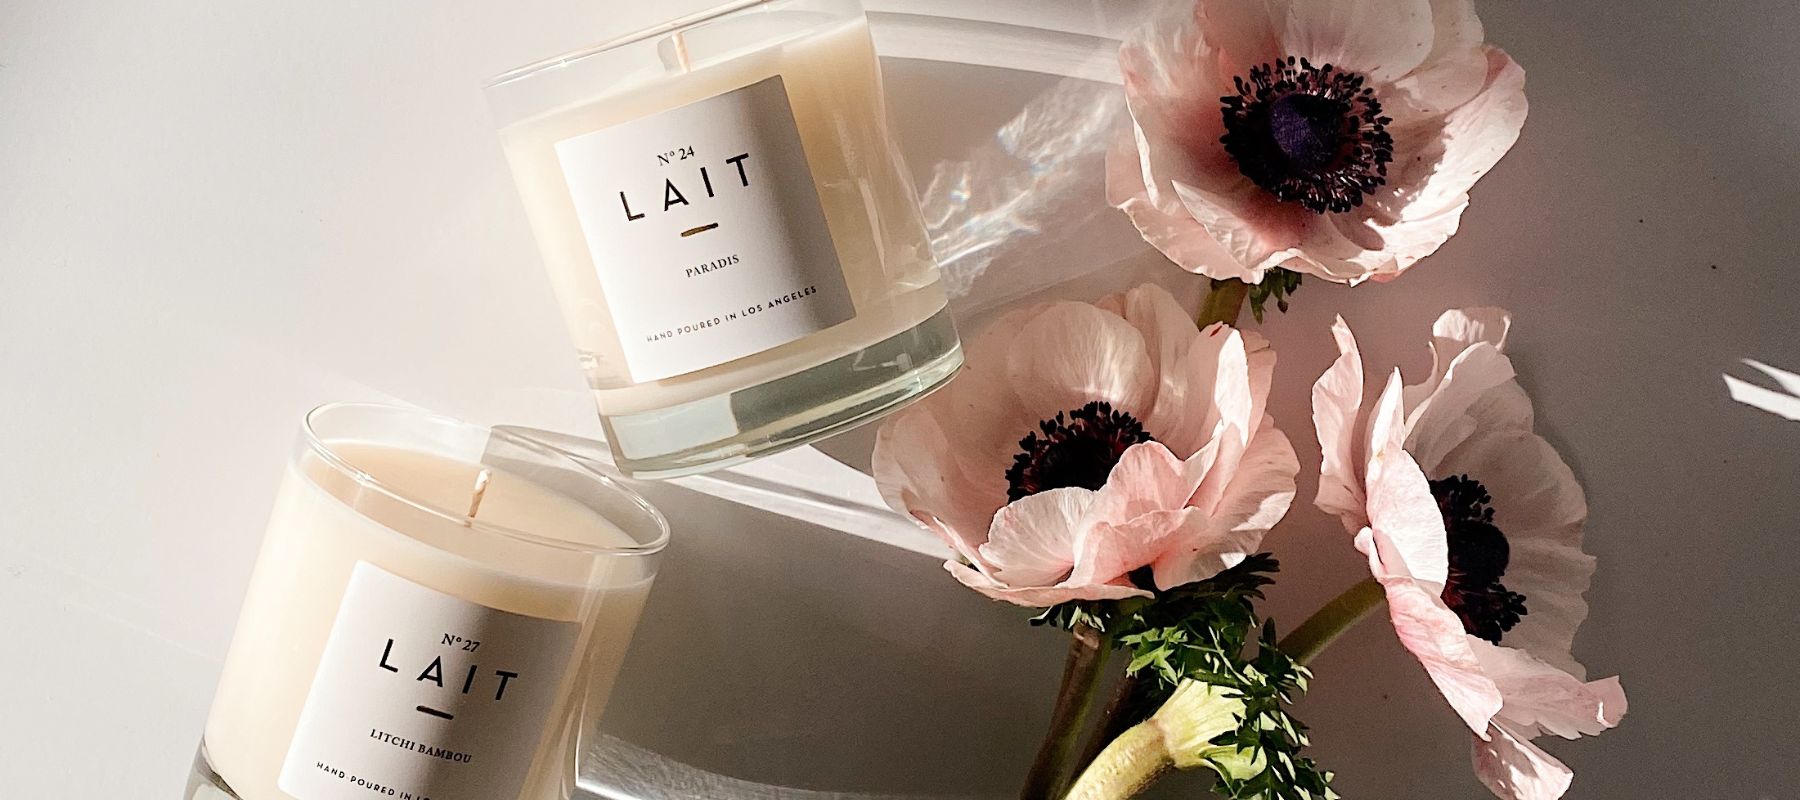 LAIT CANDLES  MADE IN LOS ANGELES – SHOP LAIT